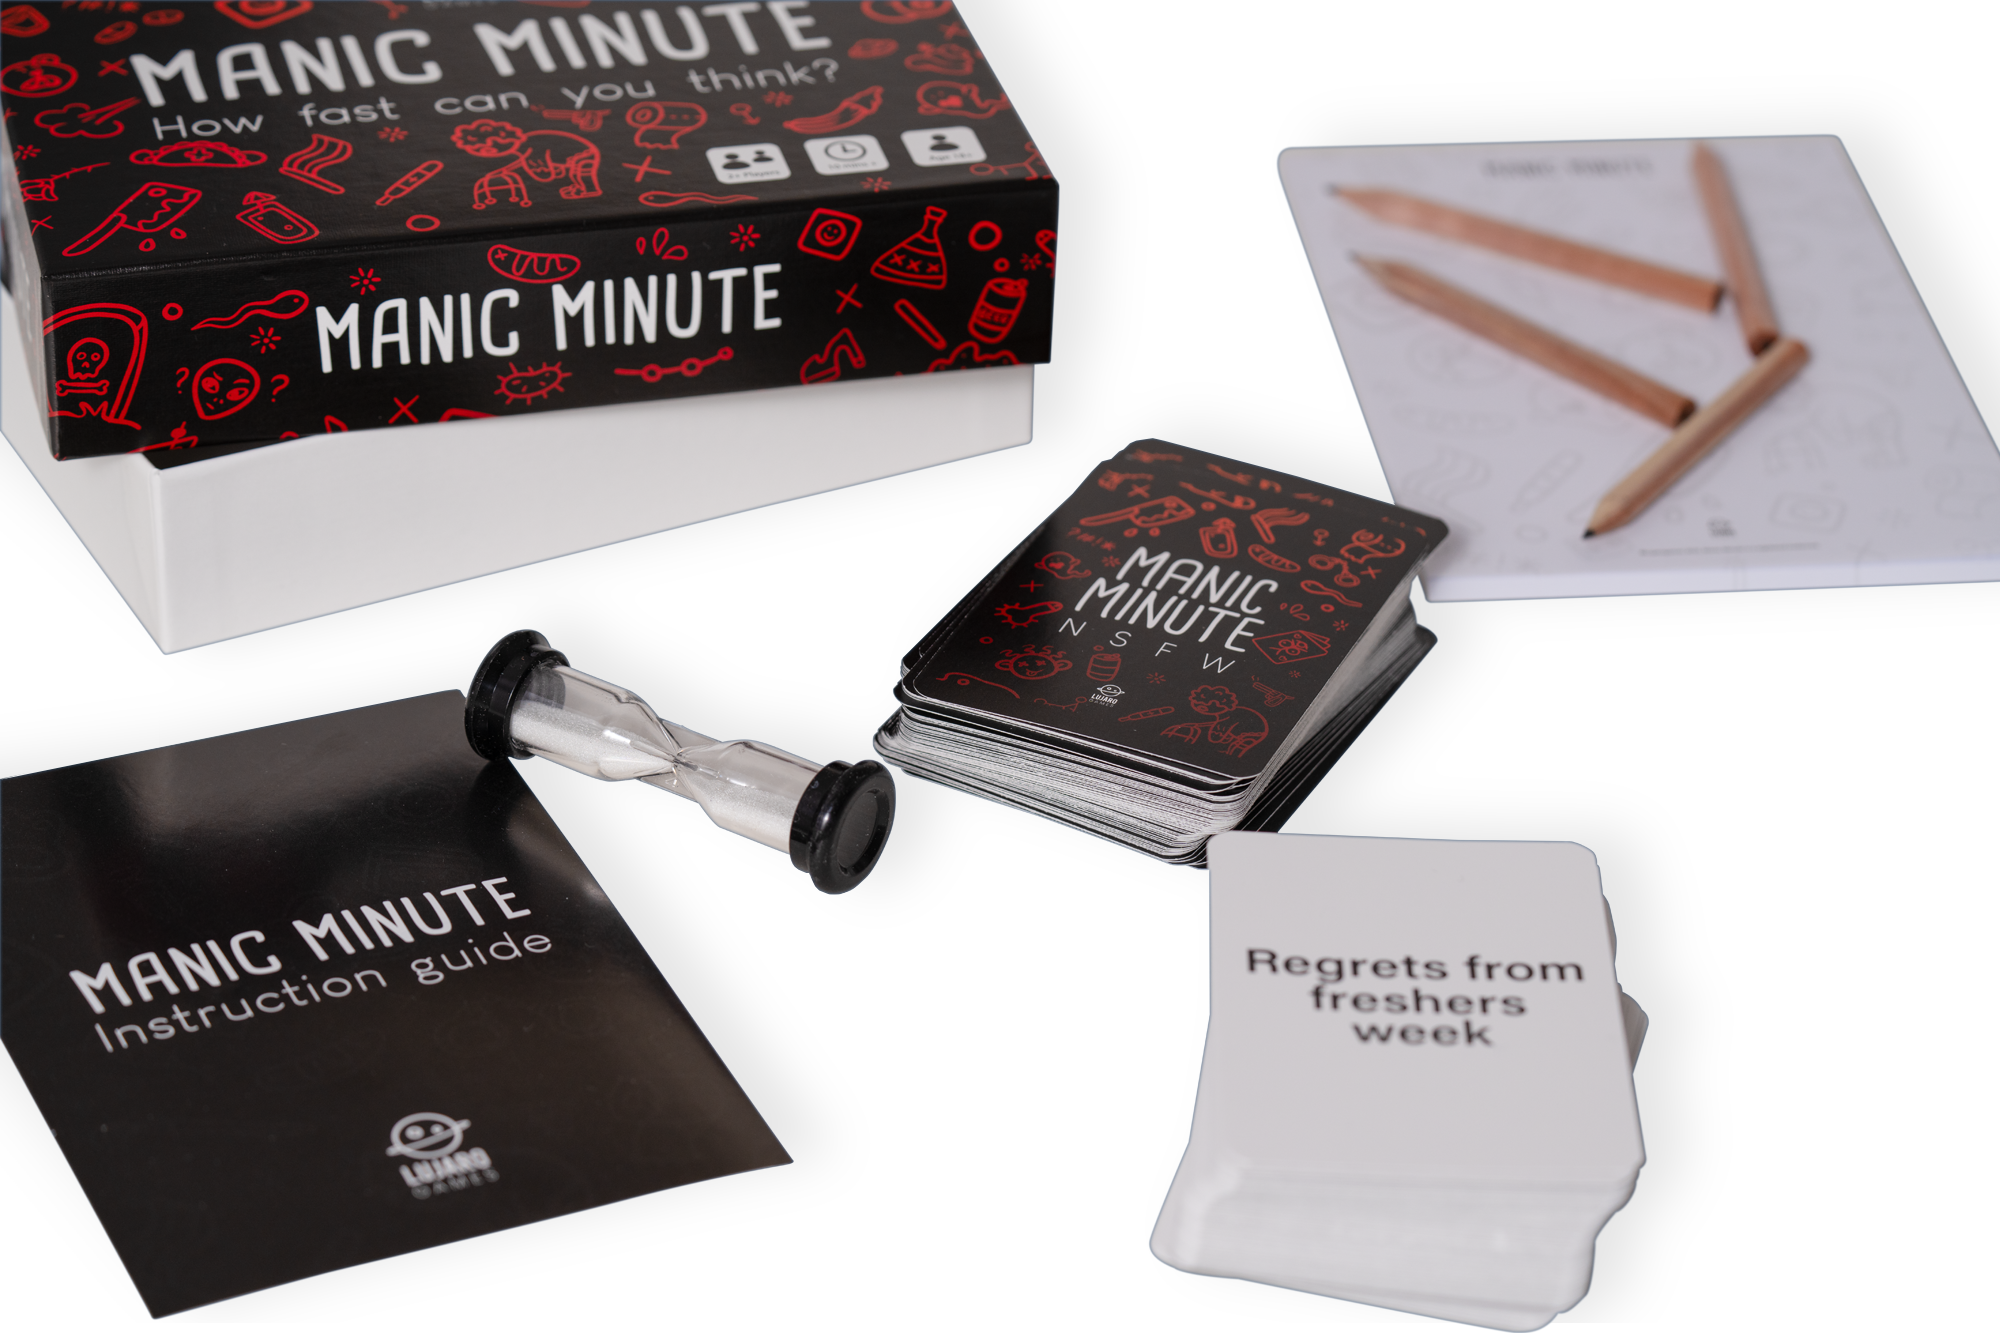 Manic Minute NSFW Edition inside the box